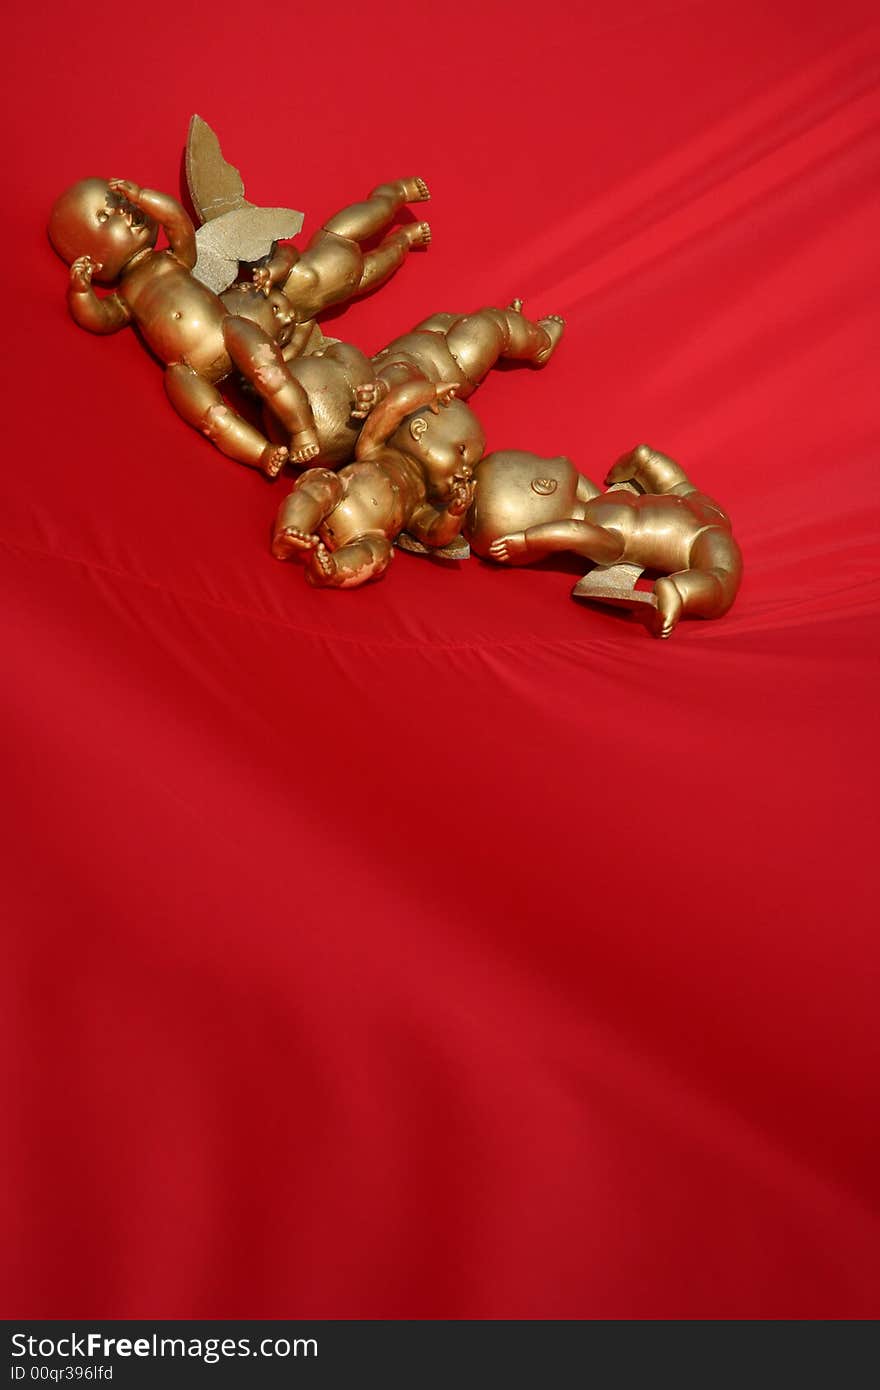 The image of gold angels on a red background. The image of gold angels on a red background